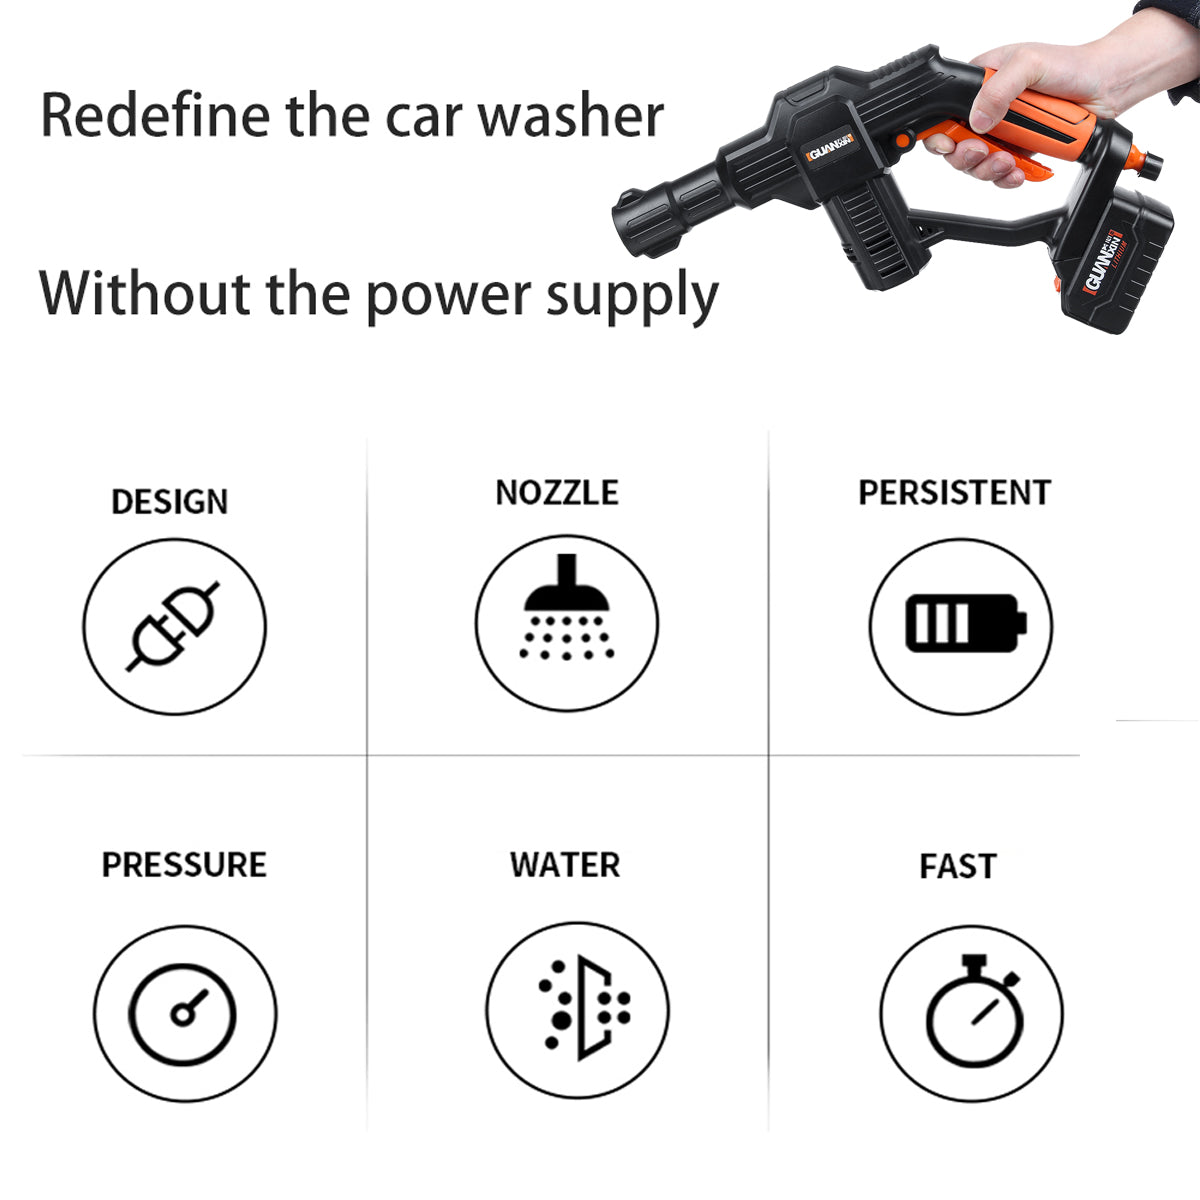 Snow 20V Cordless Portable Pressure Cleaner Washer Car Mototcycle Courtyard Glass Cleaning